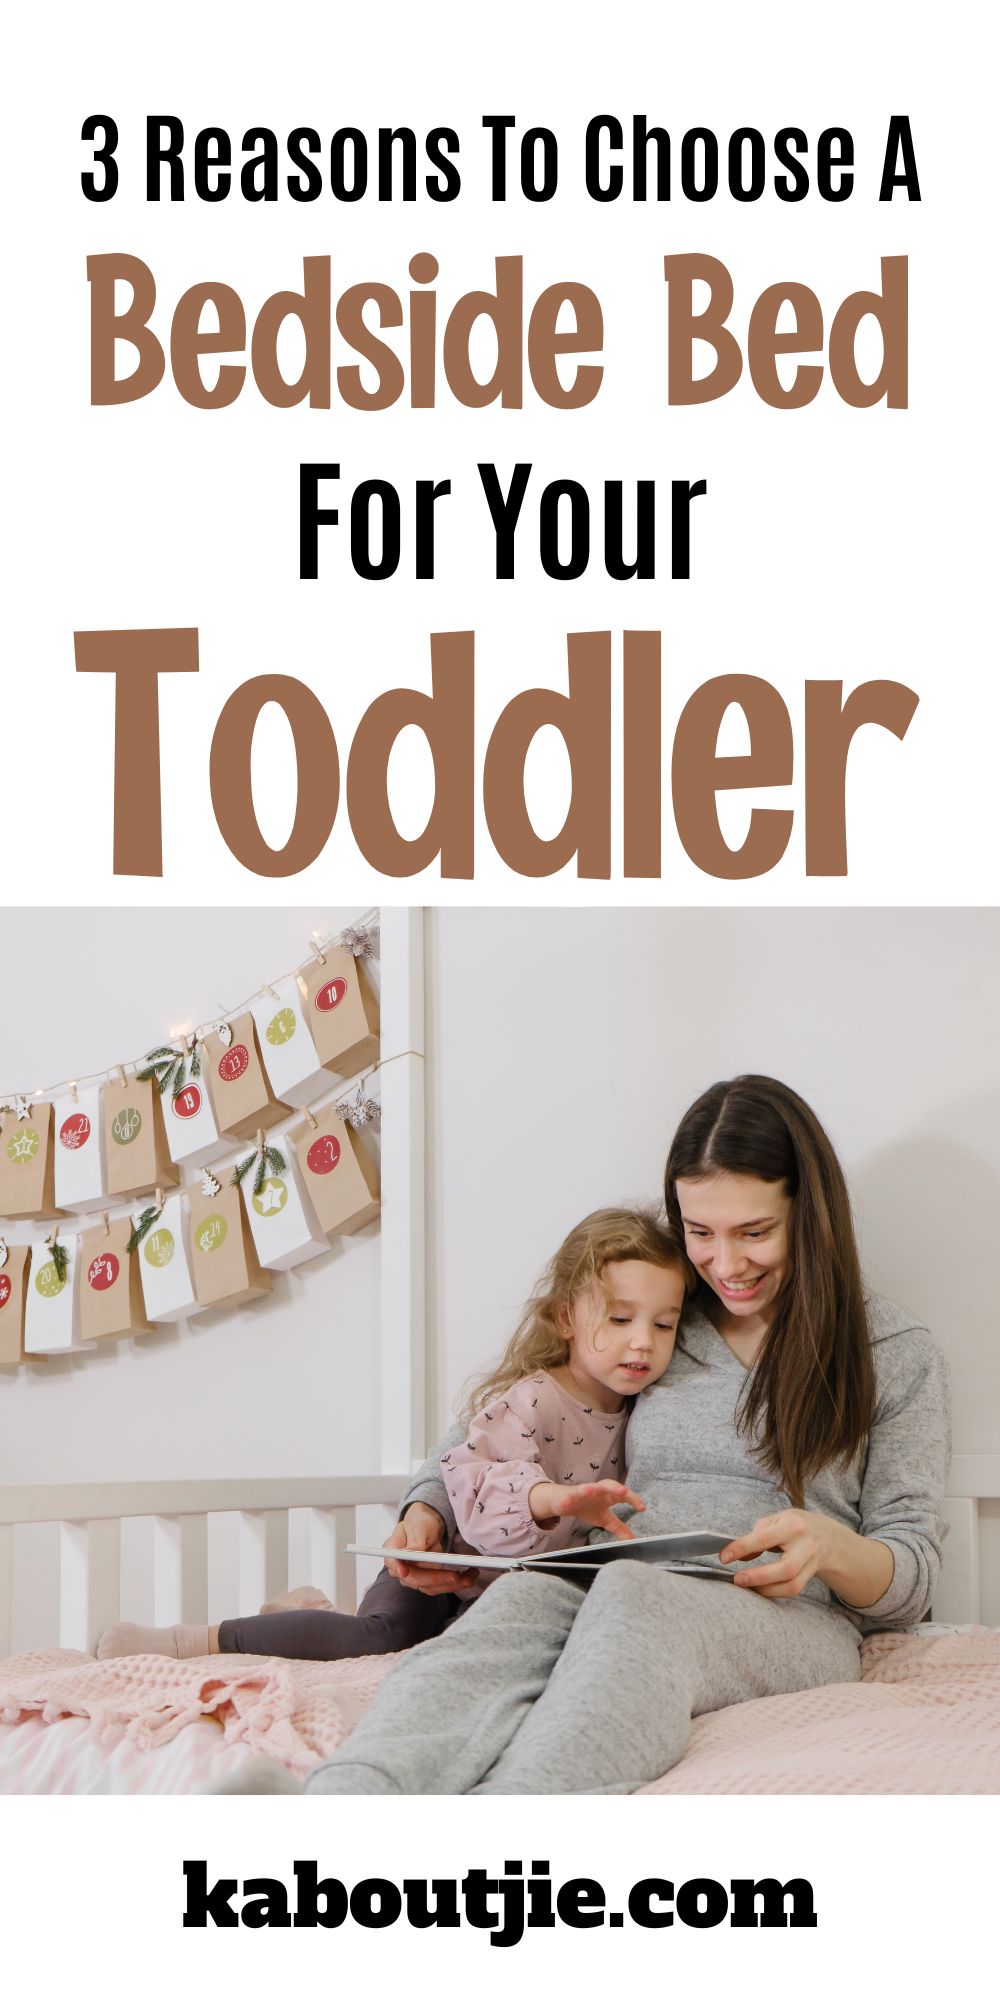 3 Reasons To Buy A Bedside Bed For Your Toddler